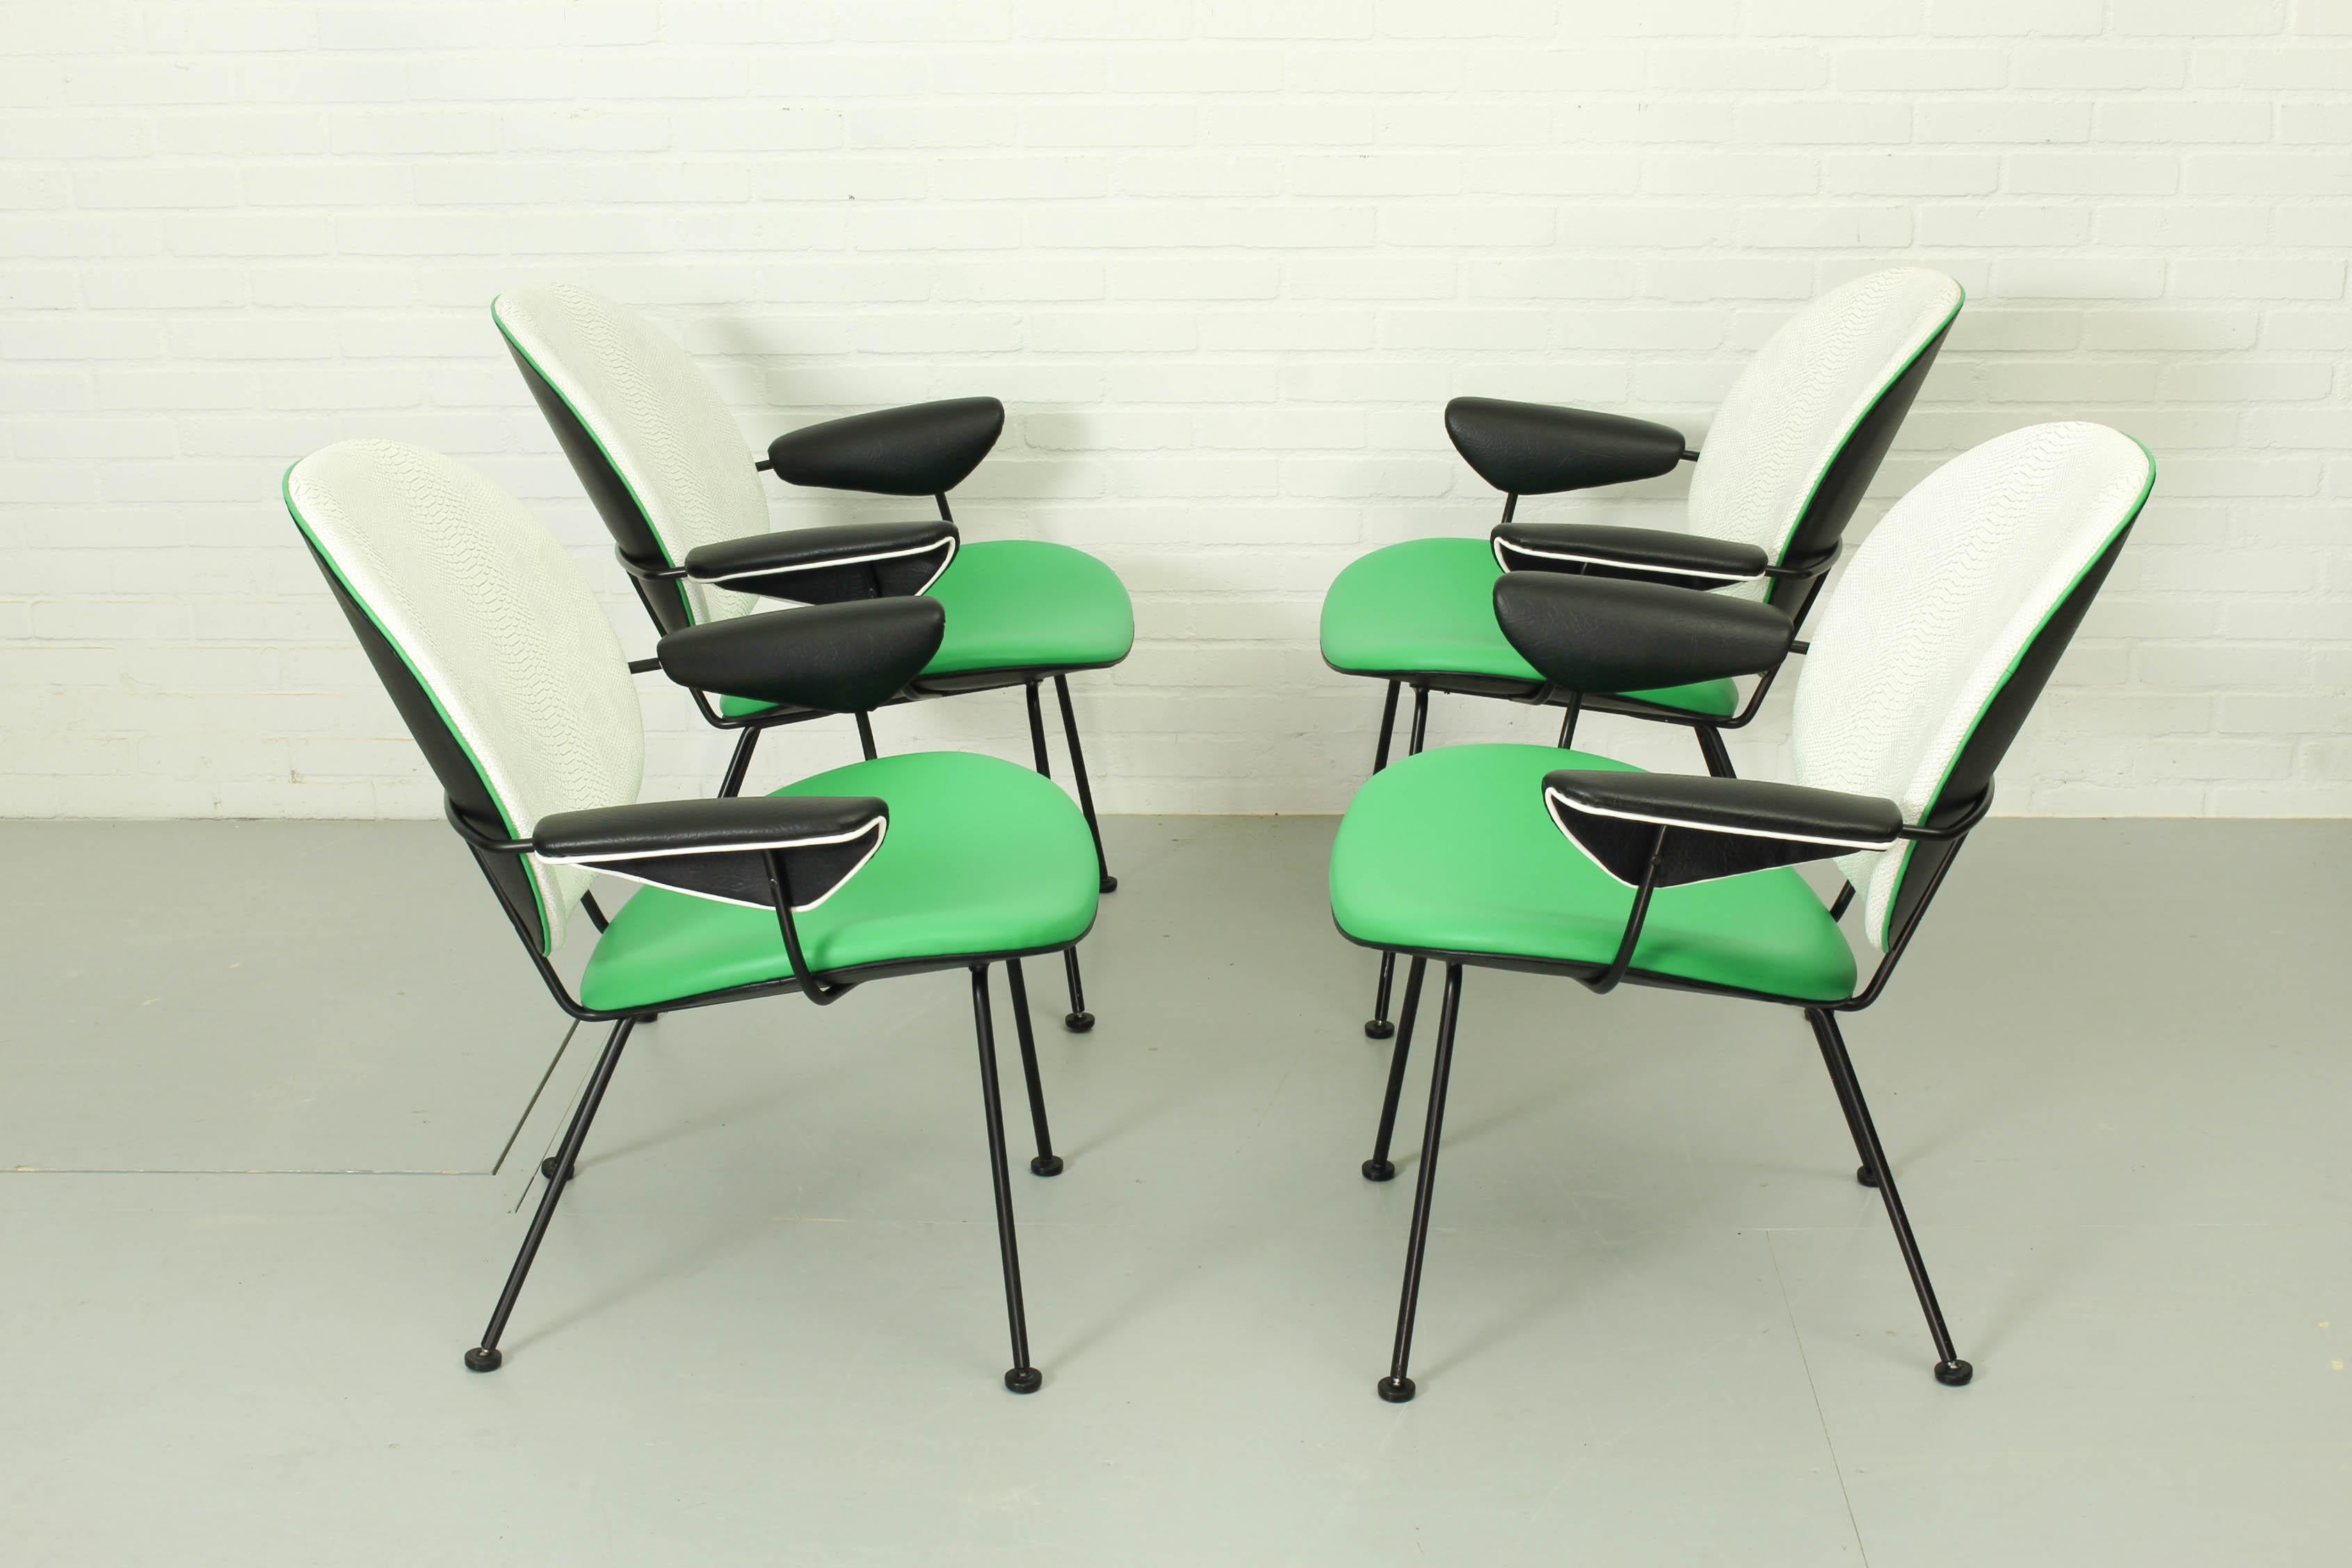 These easy chairs model 302 were designed by W.H. Gispen for Kembo in the 1950s. These chairs feature tubular metal frames and are upholstered in vinyl. The chairs are in a very good vintage condition. 

Dimensions: Depth 48cm, width 66cm, height